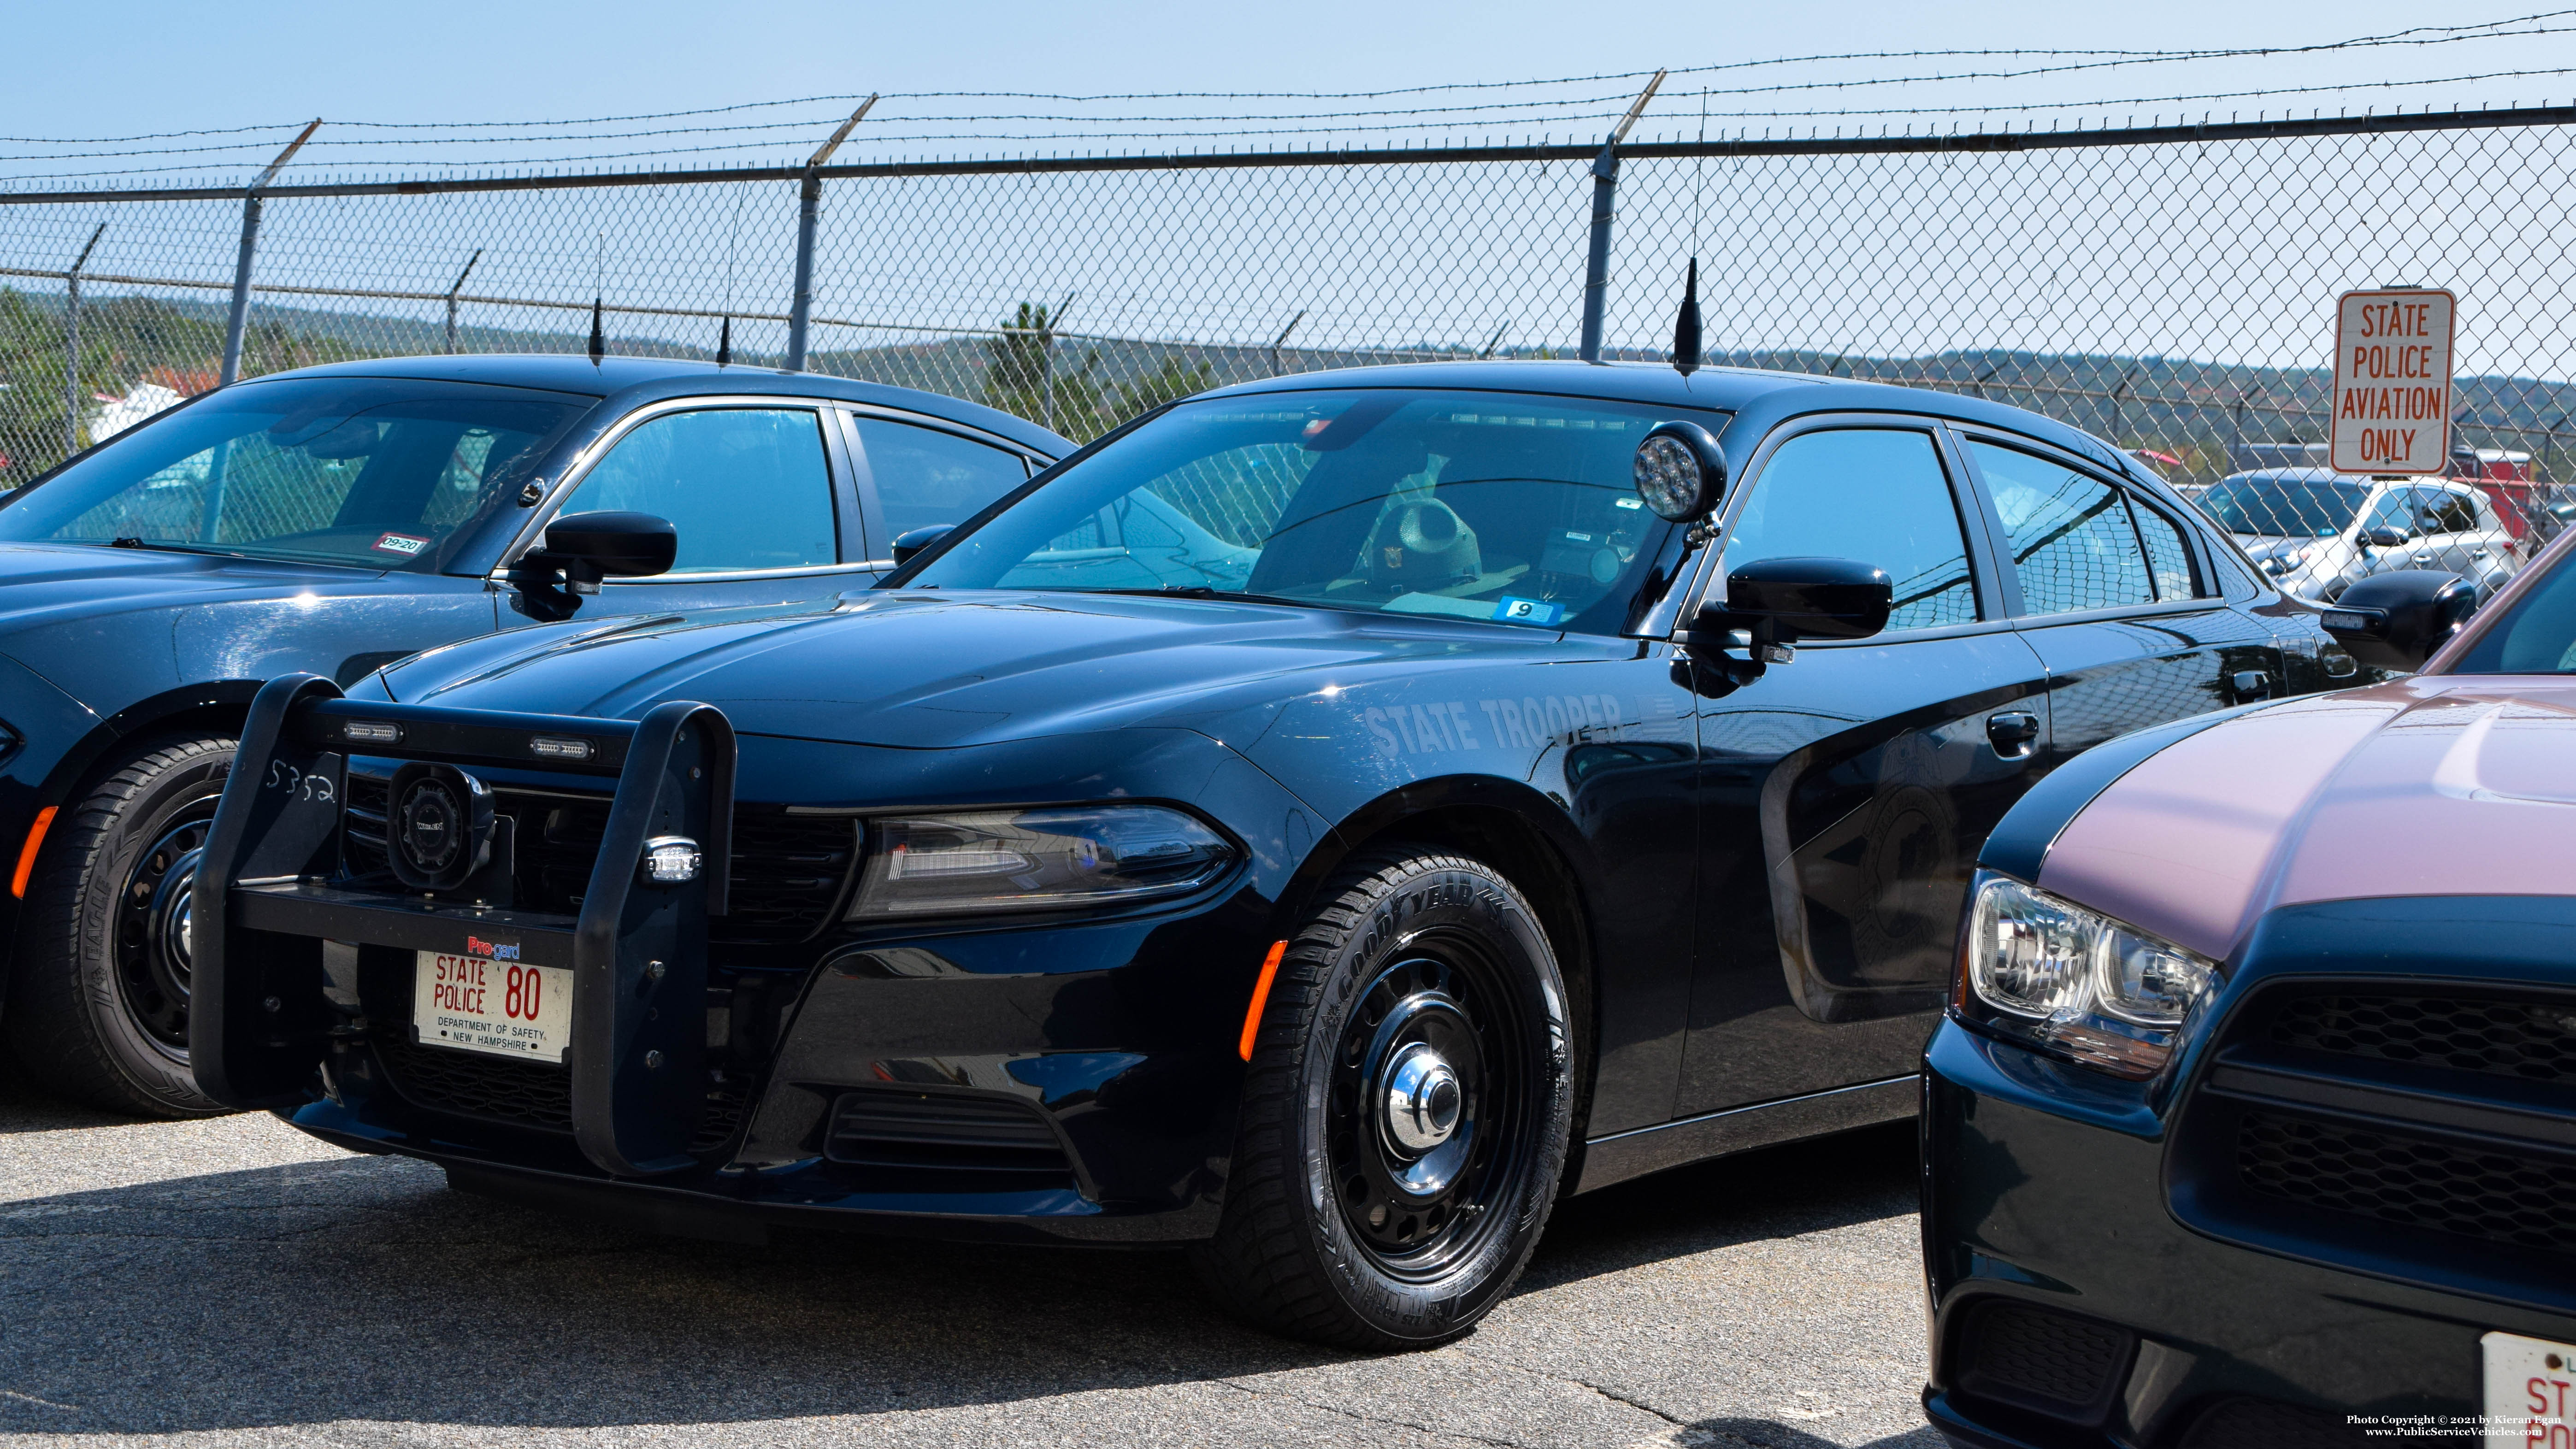 A photo  of New Hampshire State Police
            Cruiser 80, a 2017-2019 Dodge Charger             taken by Kieran Egan